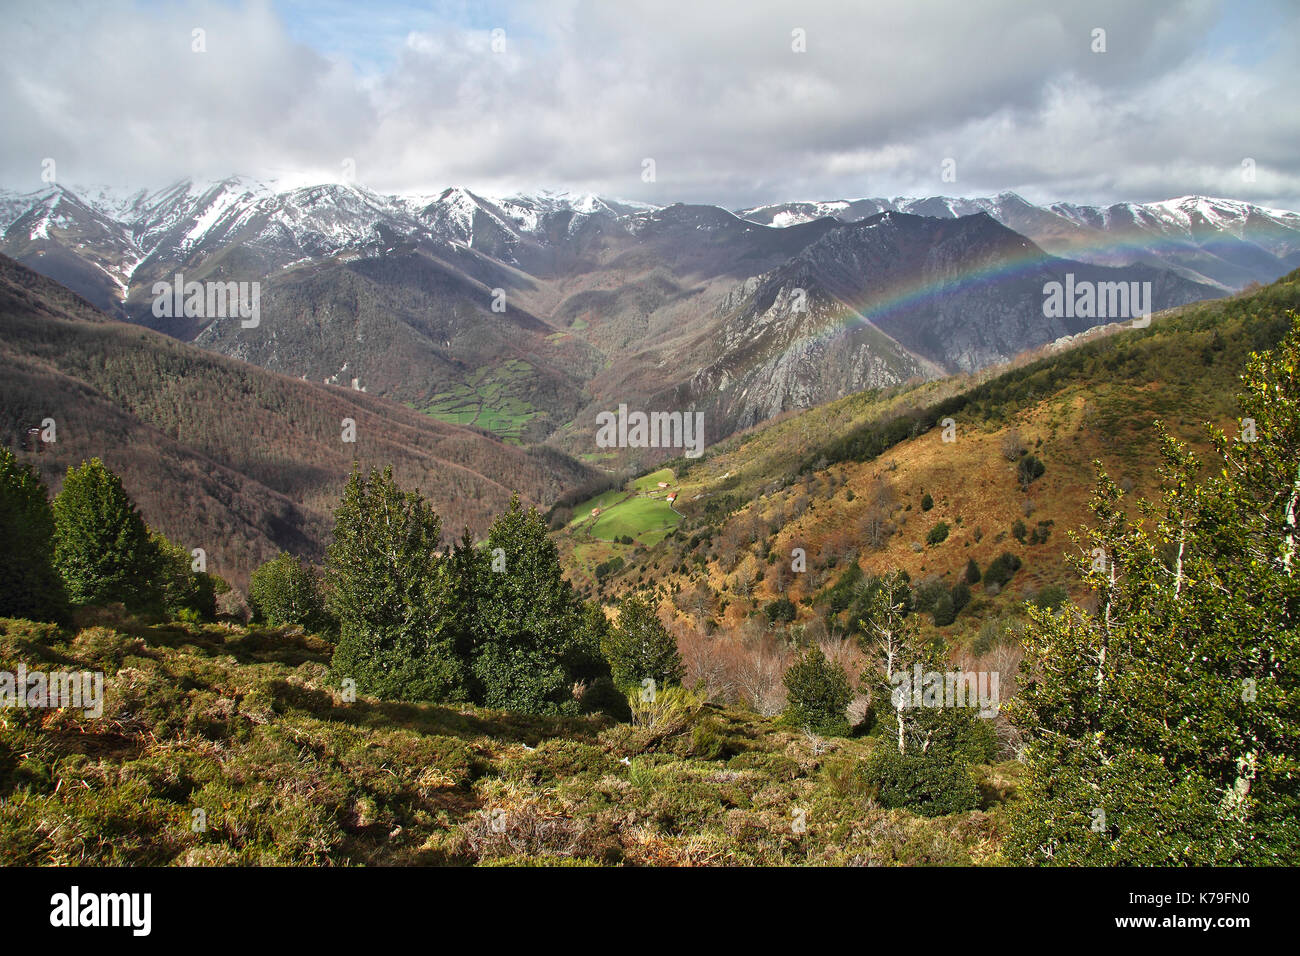 Rainbow over mountains in early spring, Asturias. Spain. Stock Photo